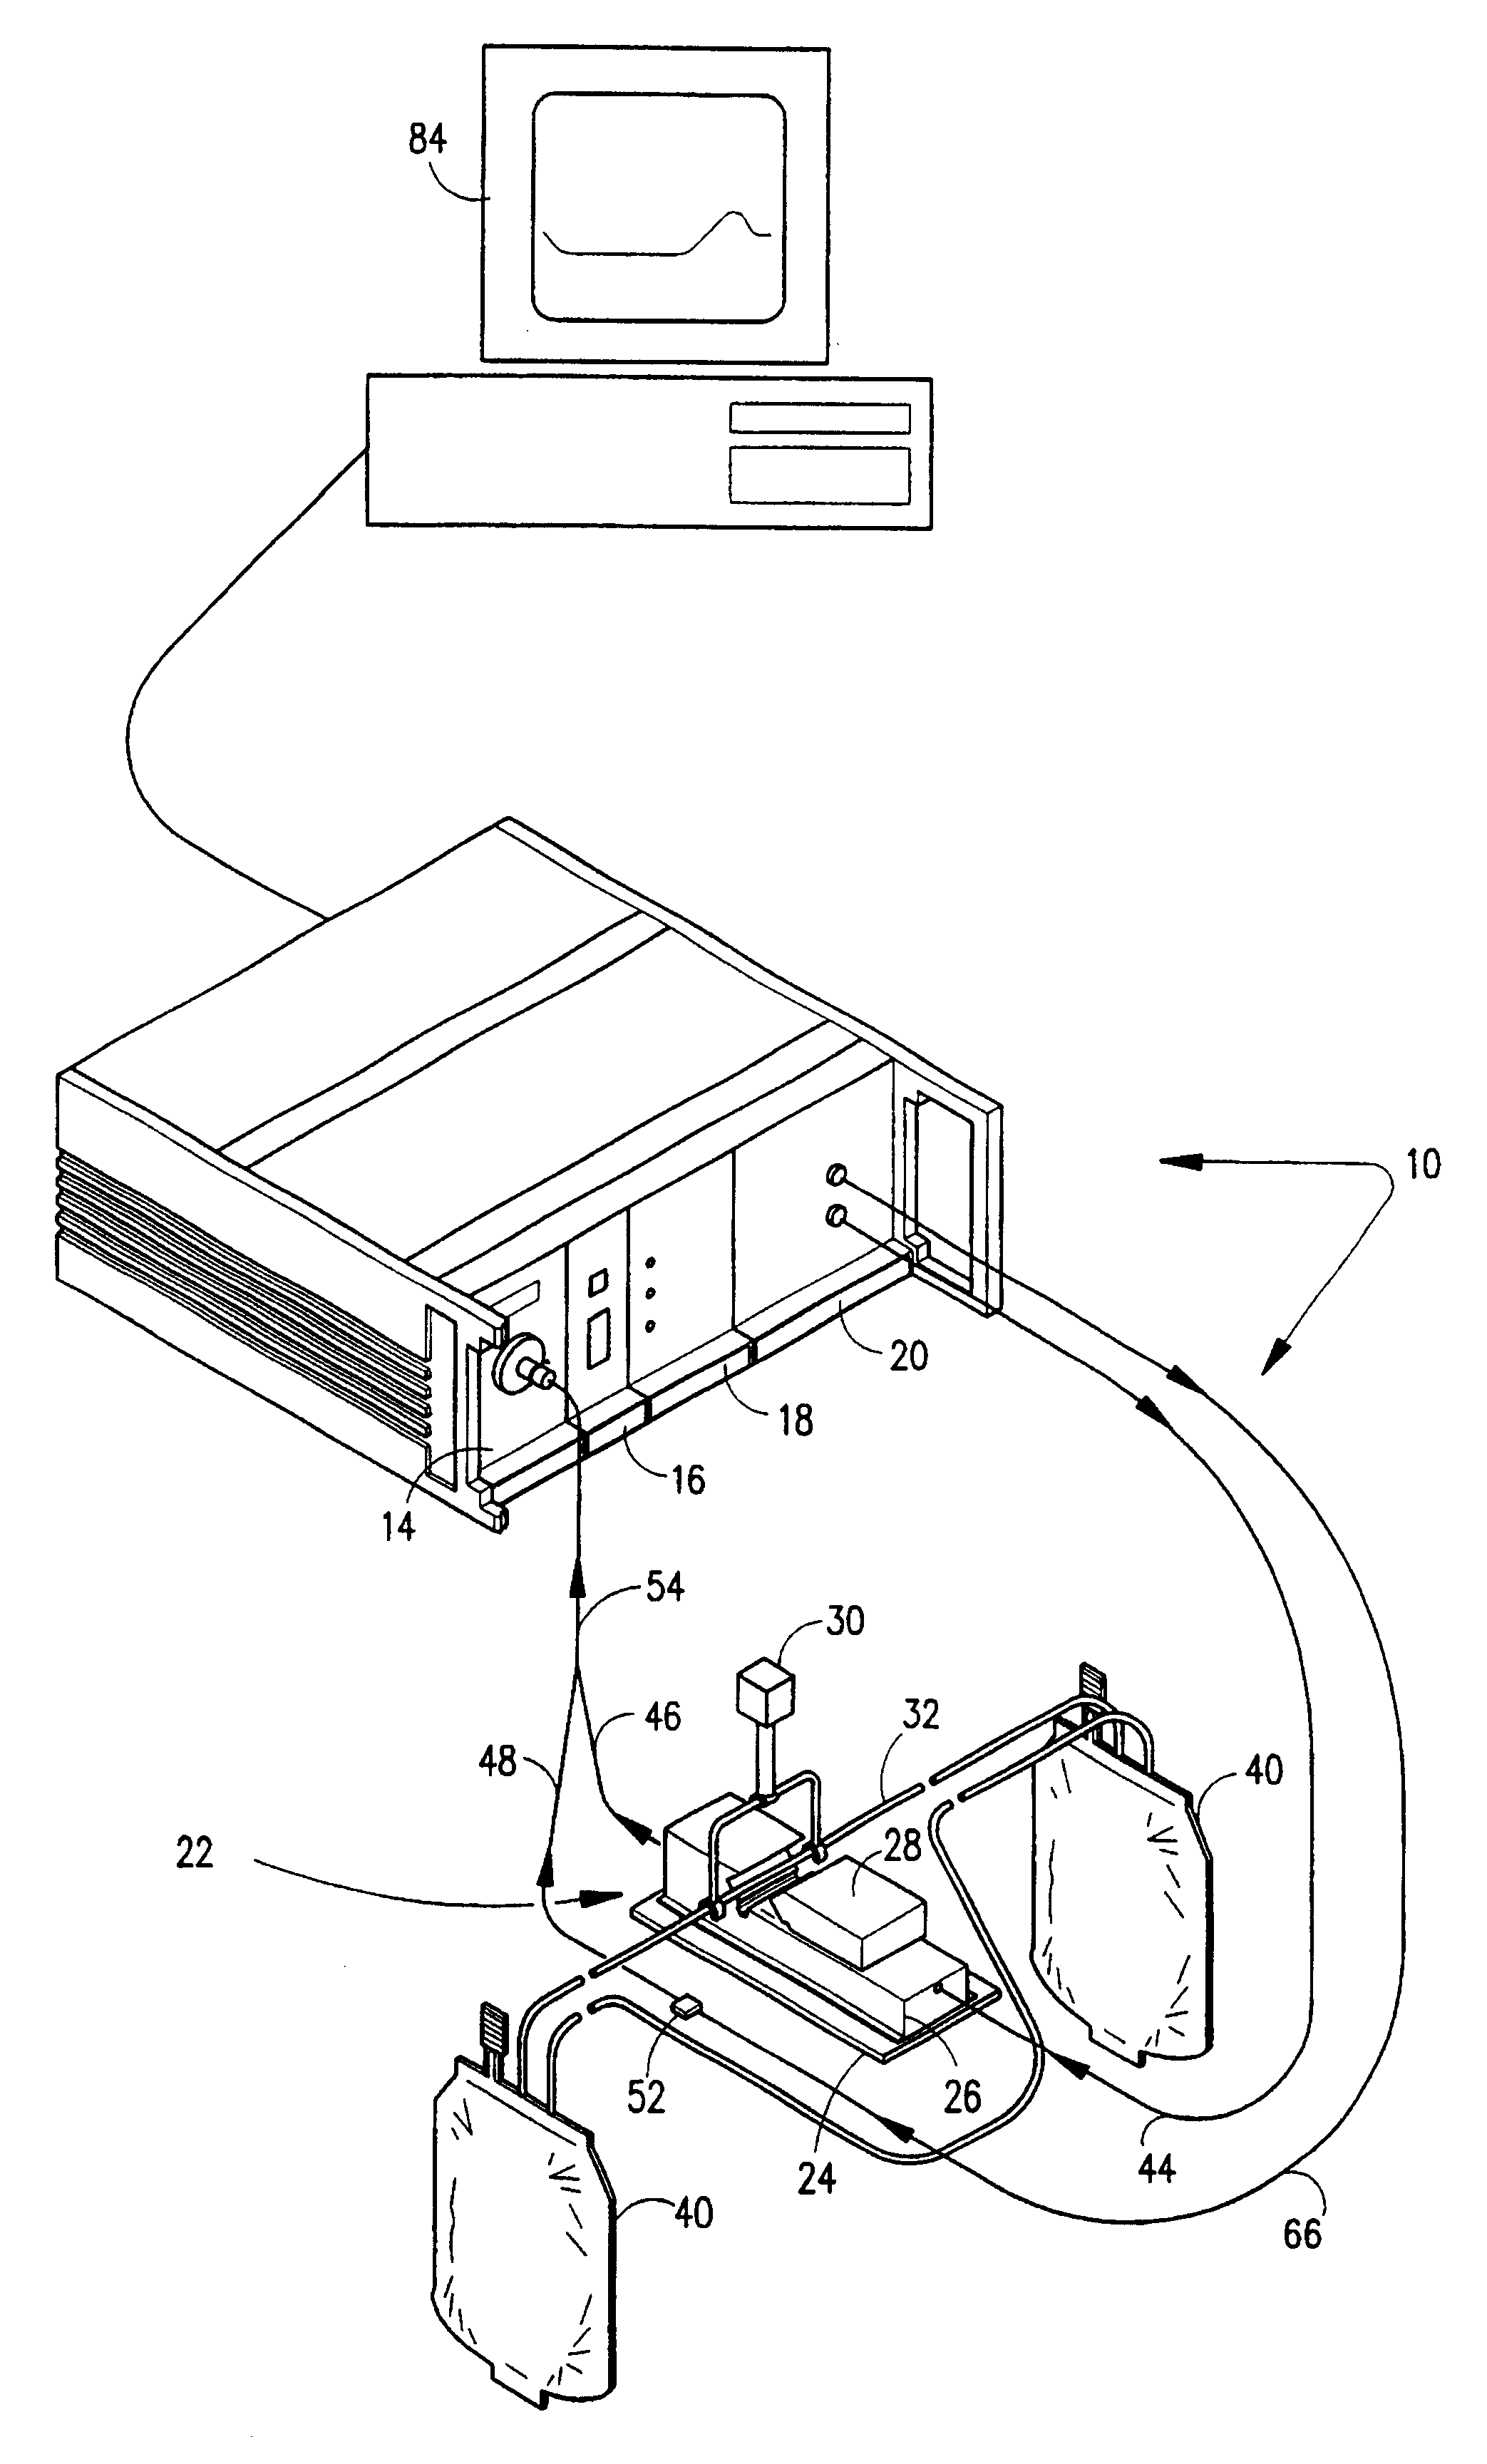 Method and apparatus for screening plasma for interferents in plasma from donor blood bags